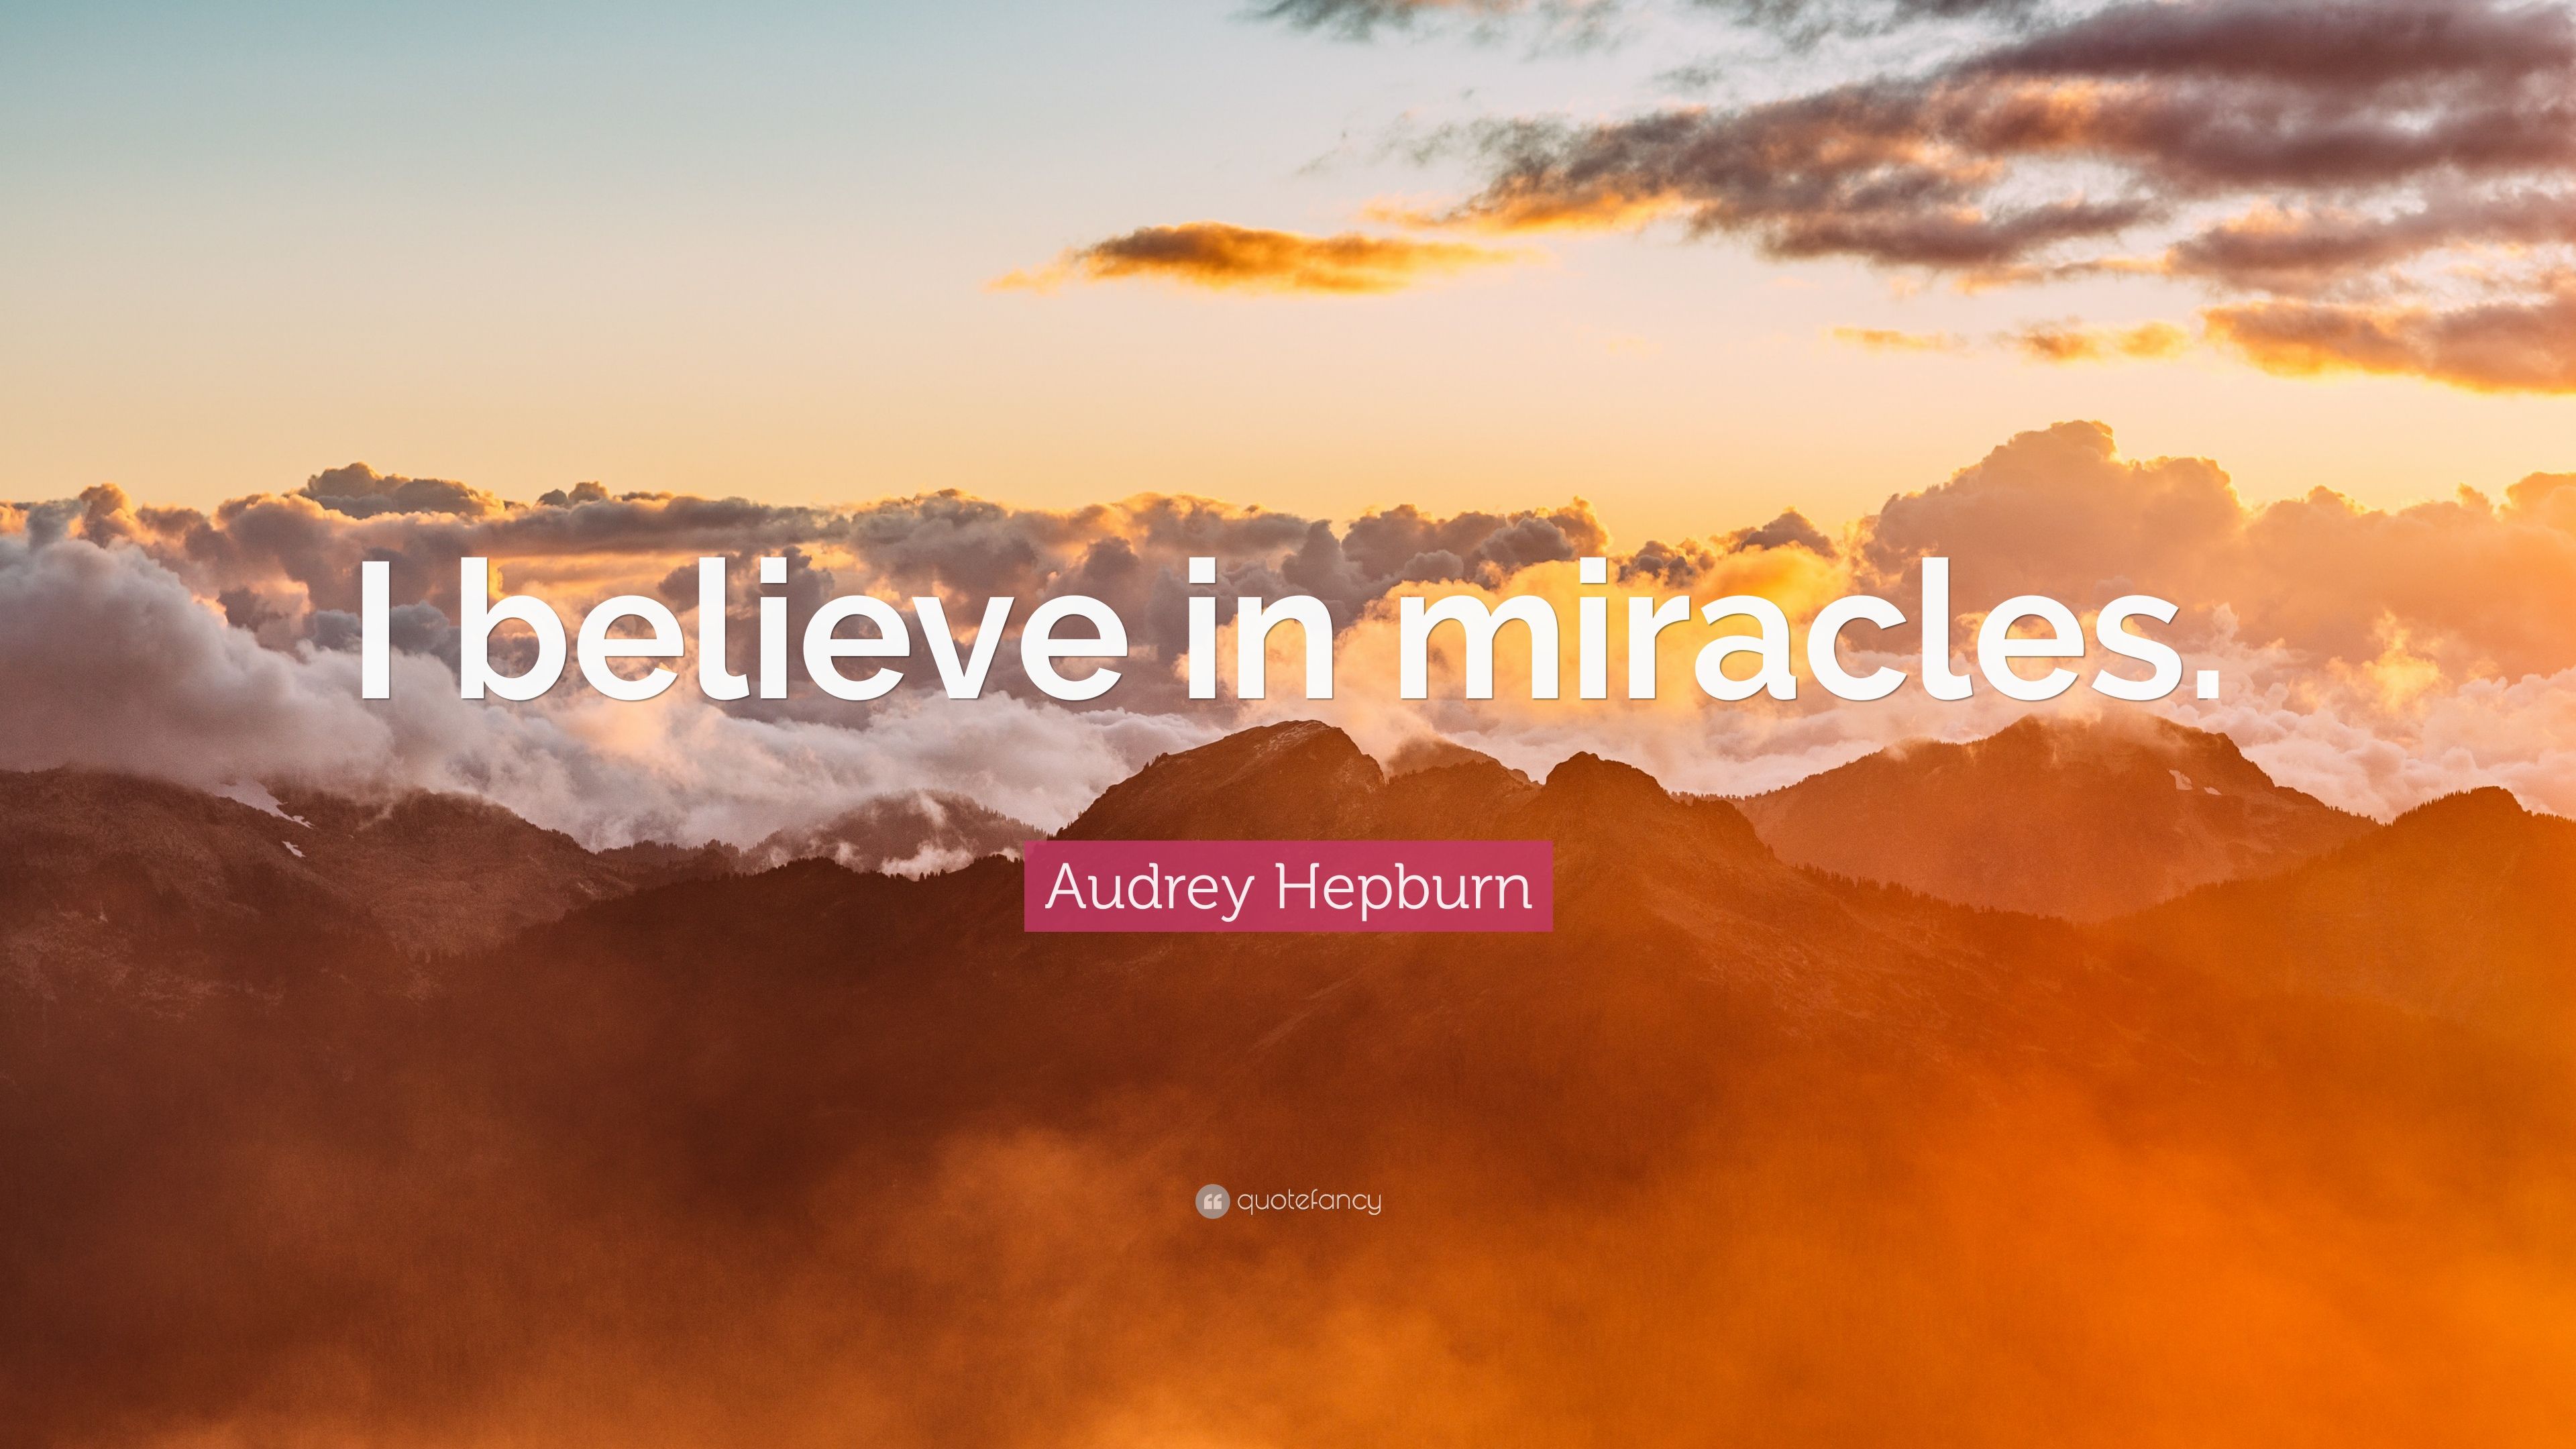 Miracles Background. Miracles Heaven Wallpaper, Miracles Wallpaper and Miracles Background